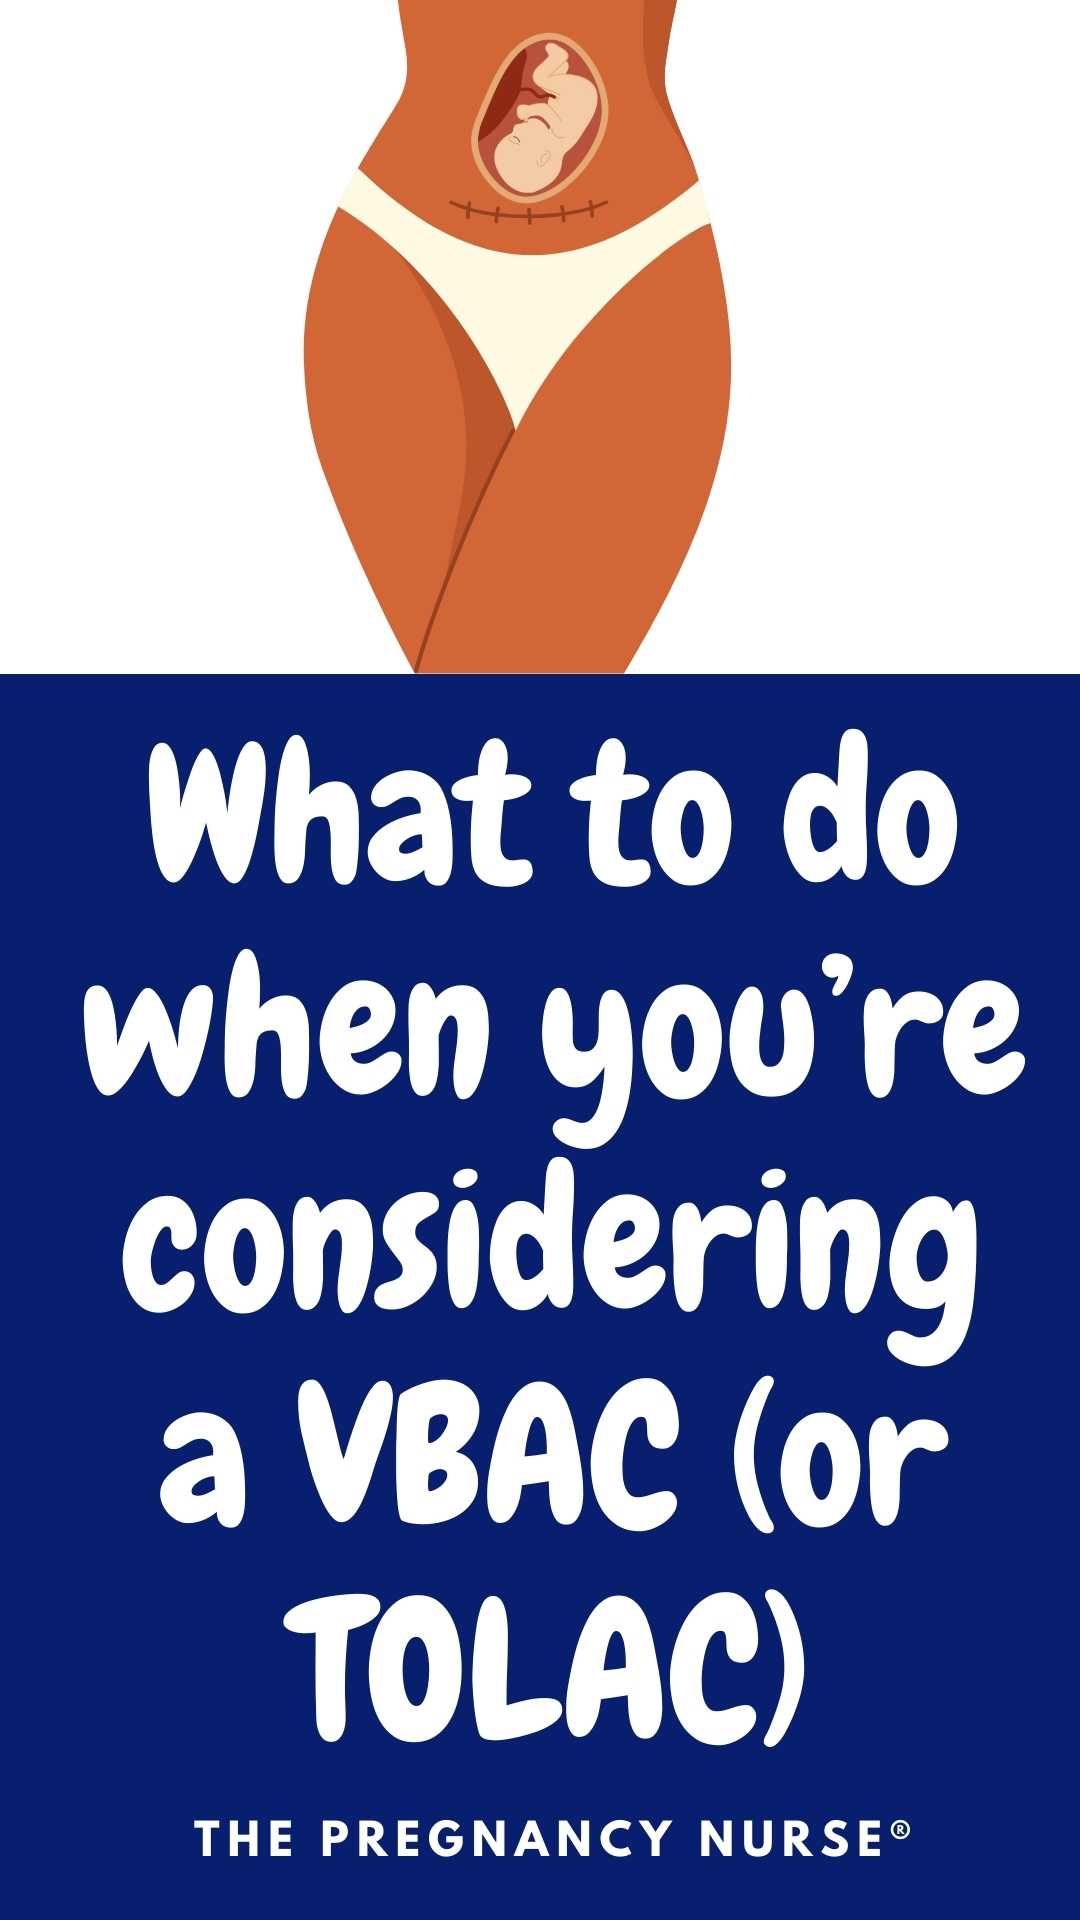 fetus in a woman with a previous cesarean / what to do when you're considering a VBAC (or TOLAC).